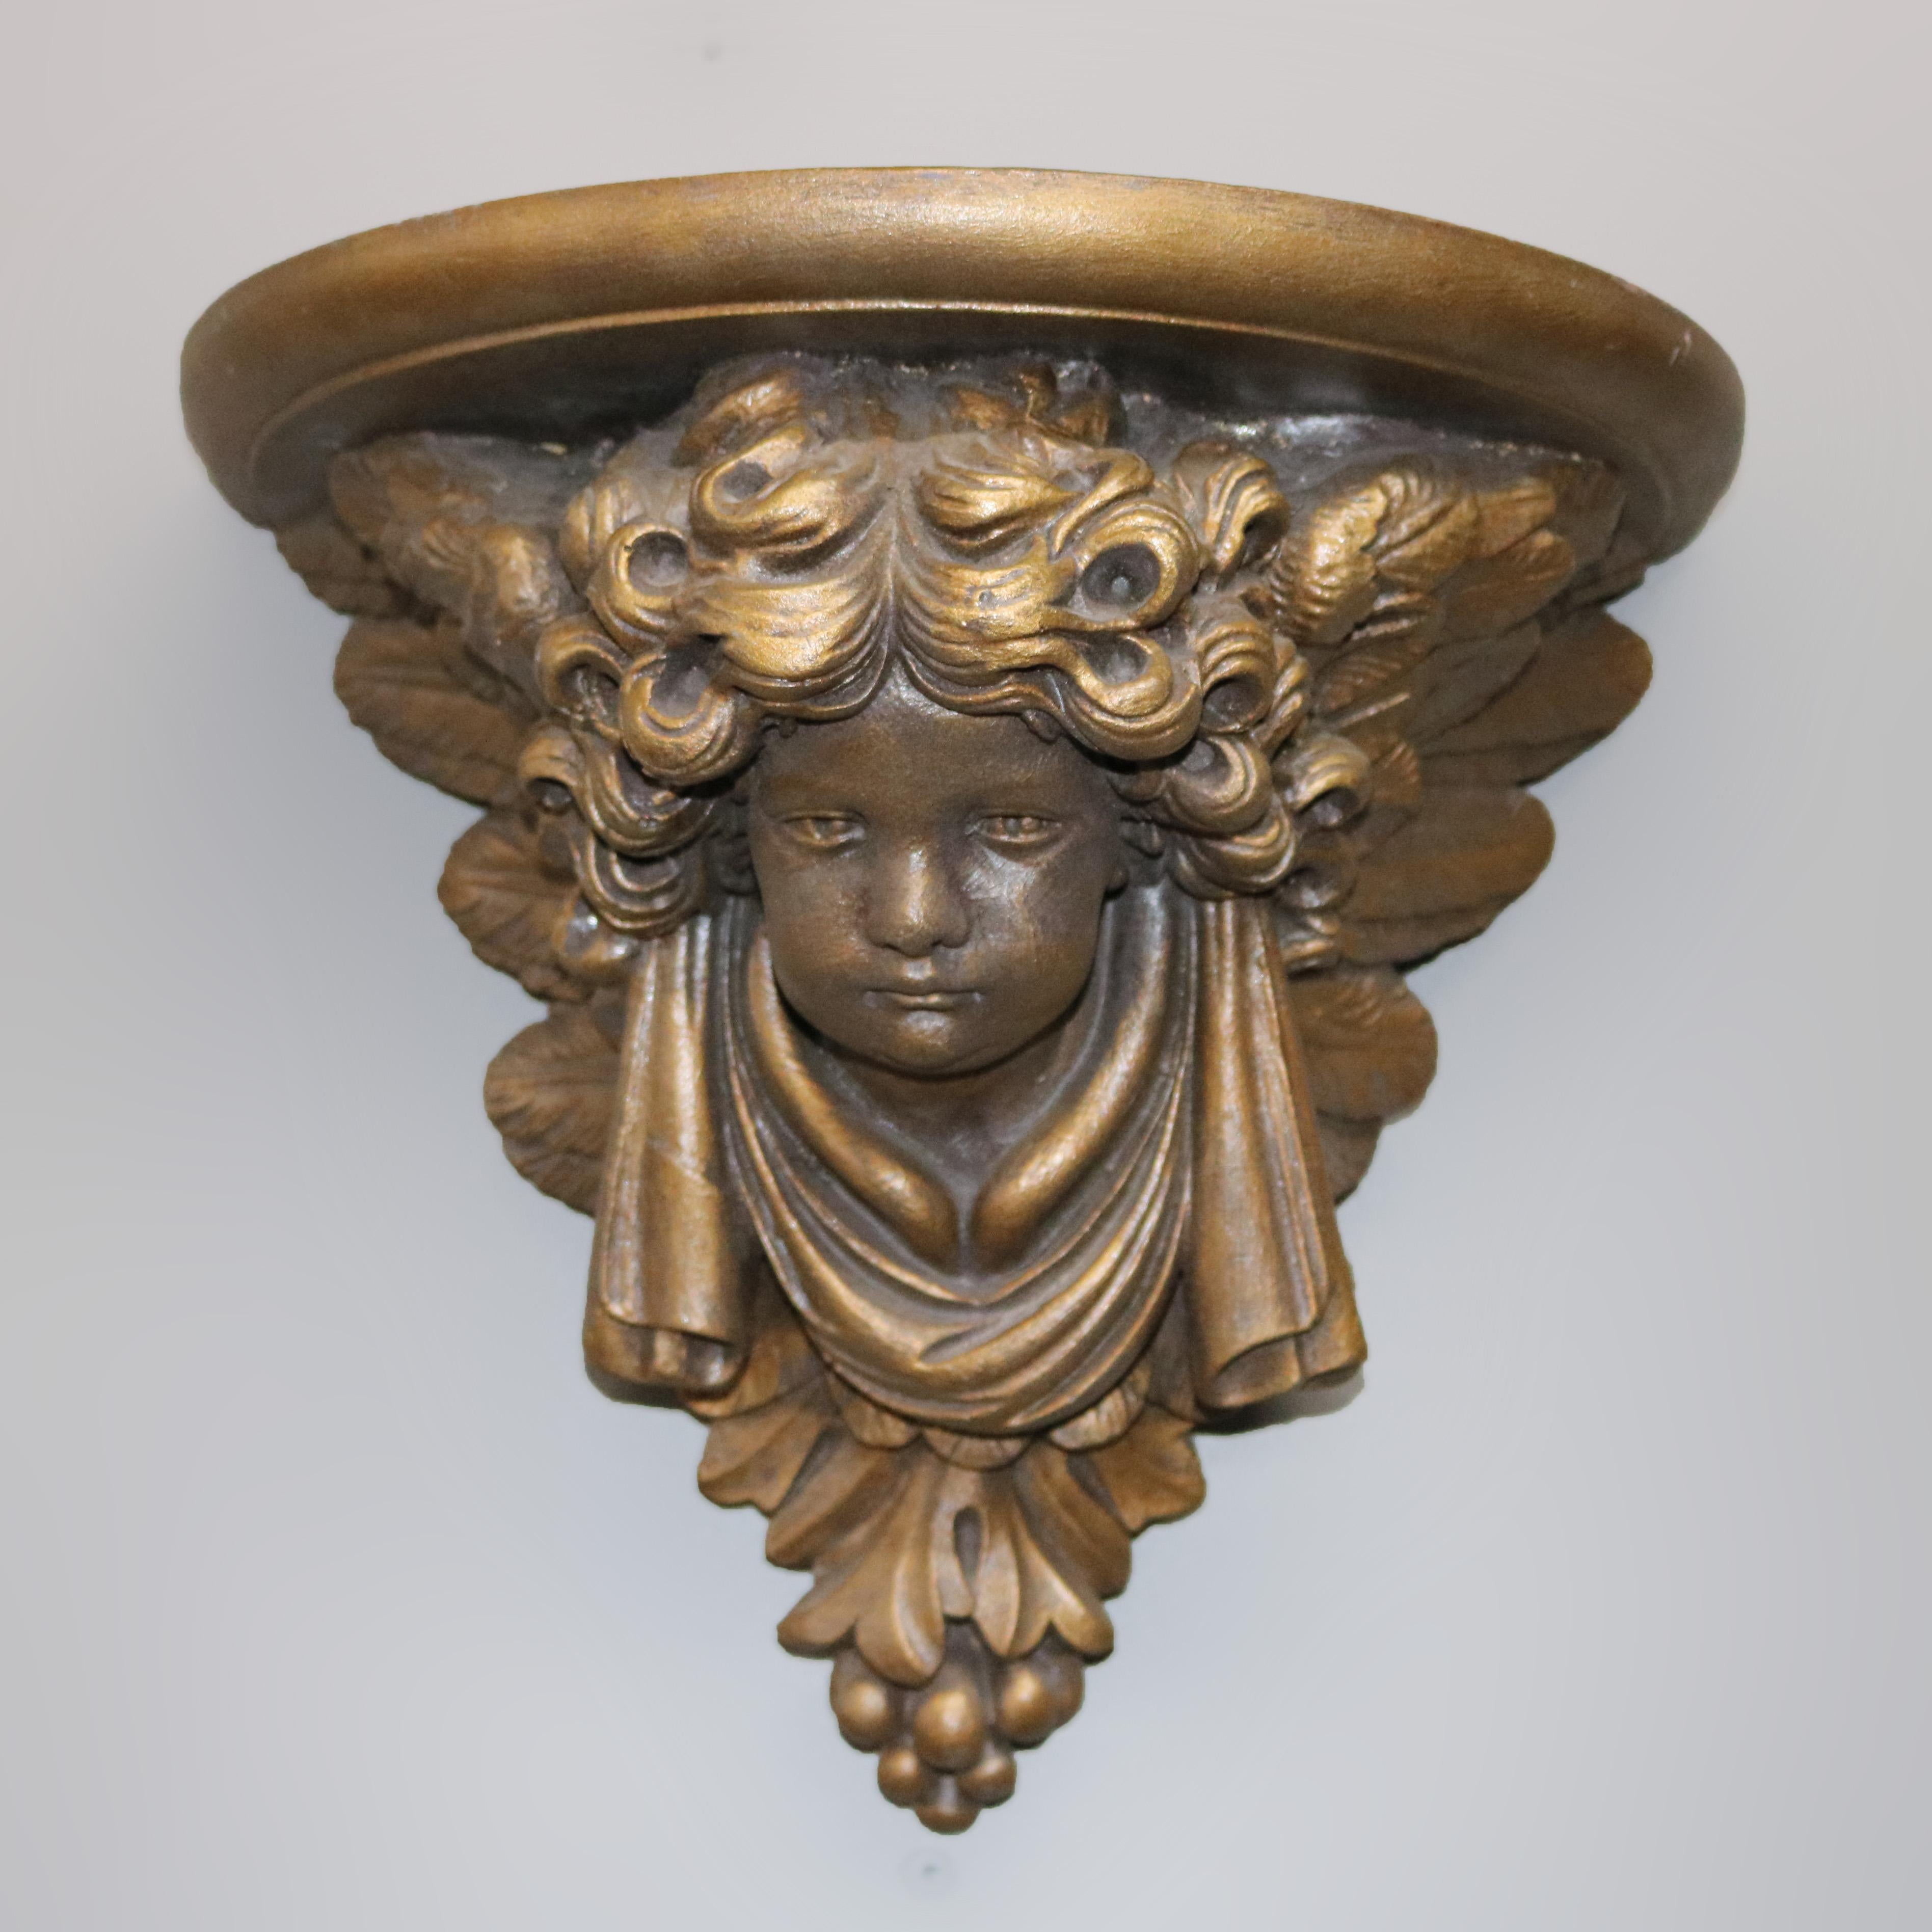 A pair of vintage figural composite wall shelves offer shelf over classical cherubs with foliate elements, 20th century

Measures: 12